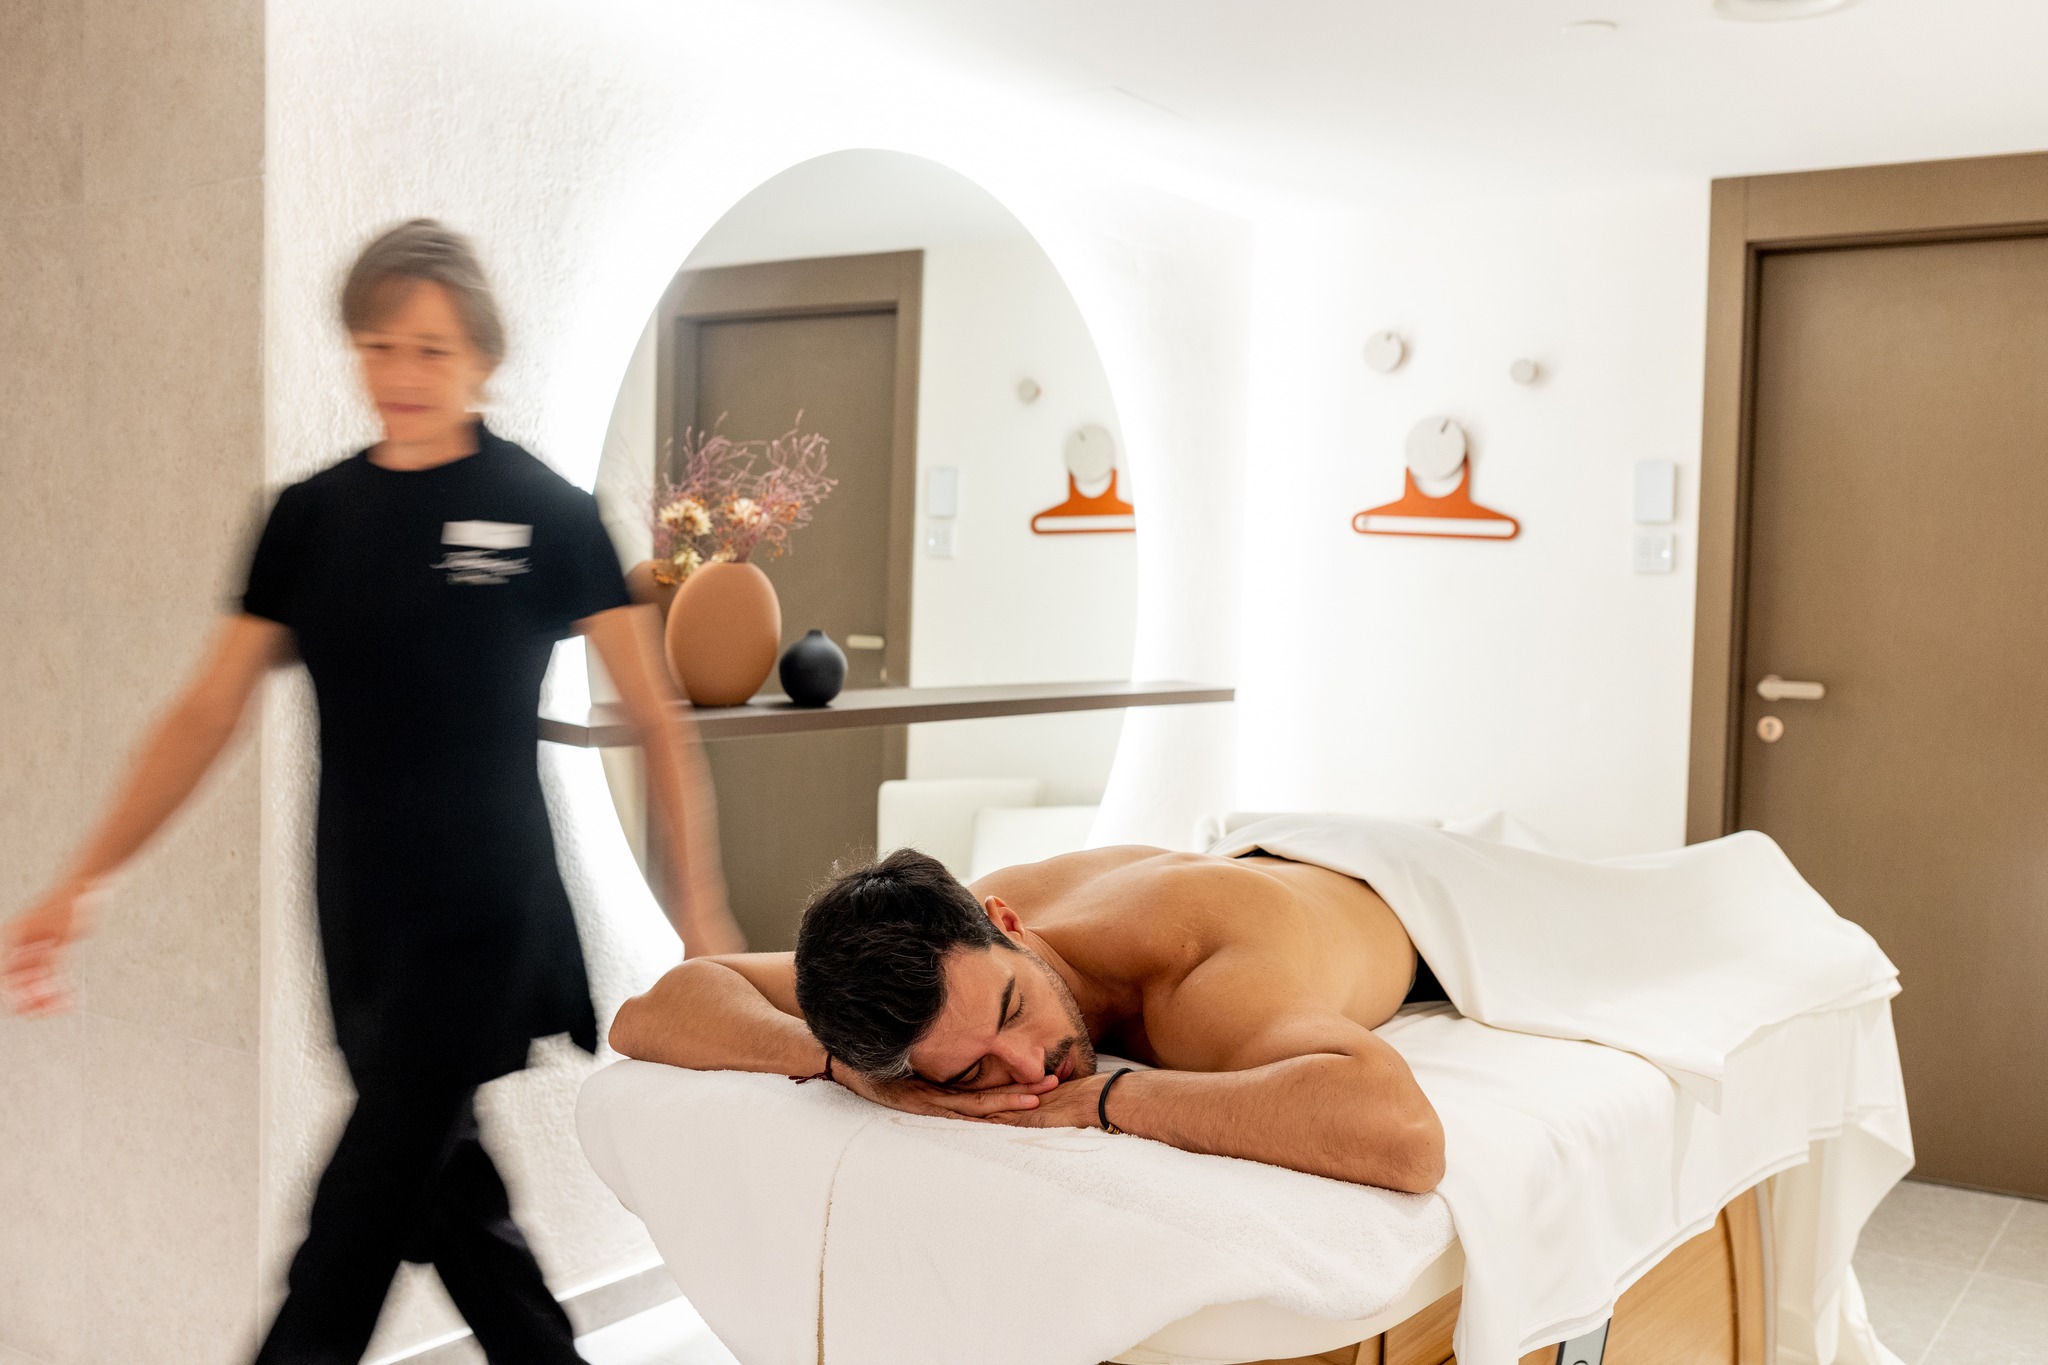 Kempinski Hotel Corvinus Budapest has redesigned its Kempinski The Spa facilities, concept and treatments with a new travel-inspired persona.